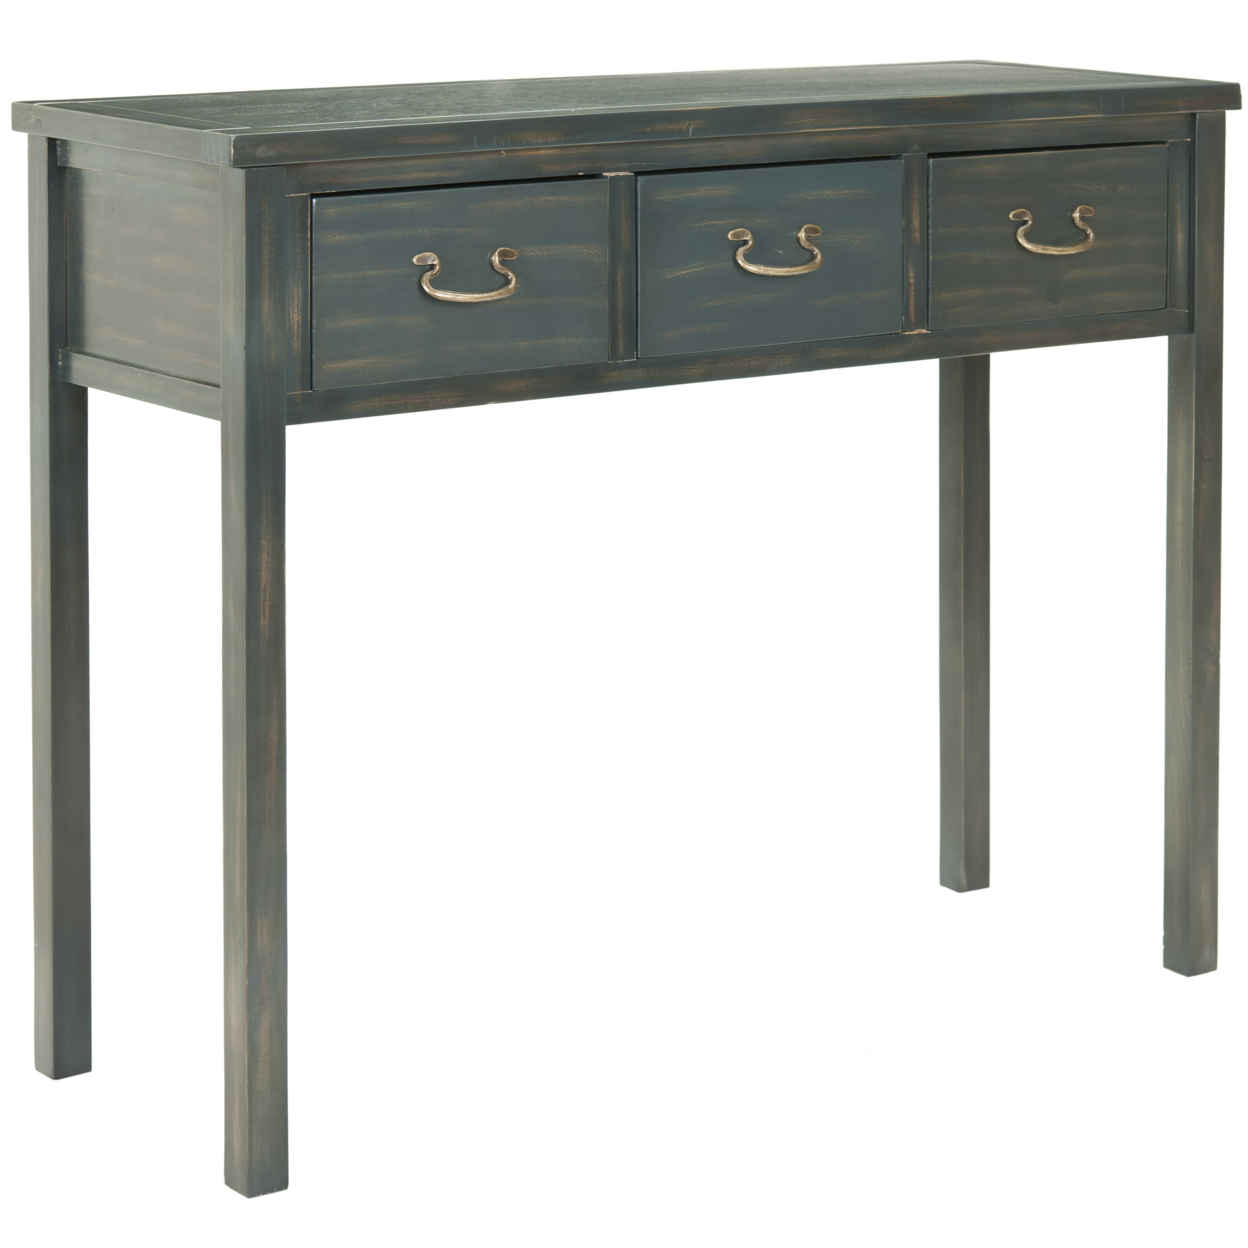 SAFAVIEH Cindy Console Table With Storage Drawers Dark Teal